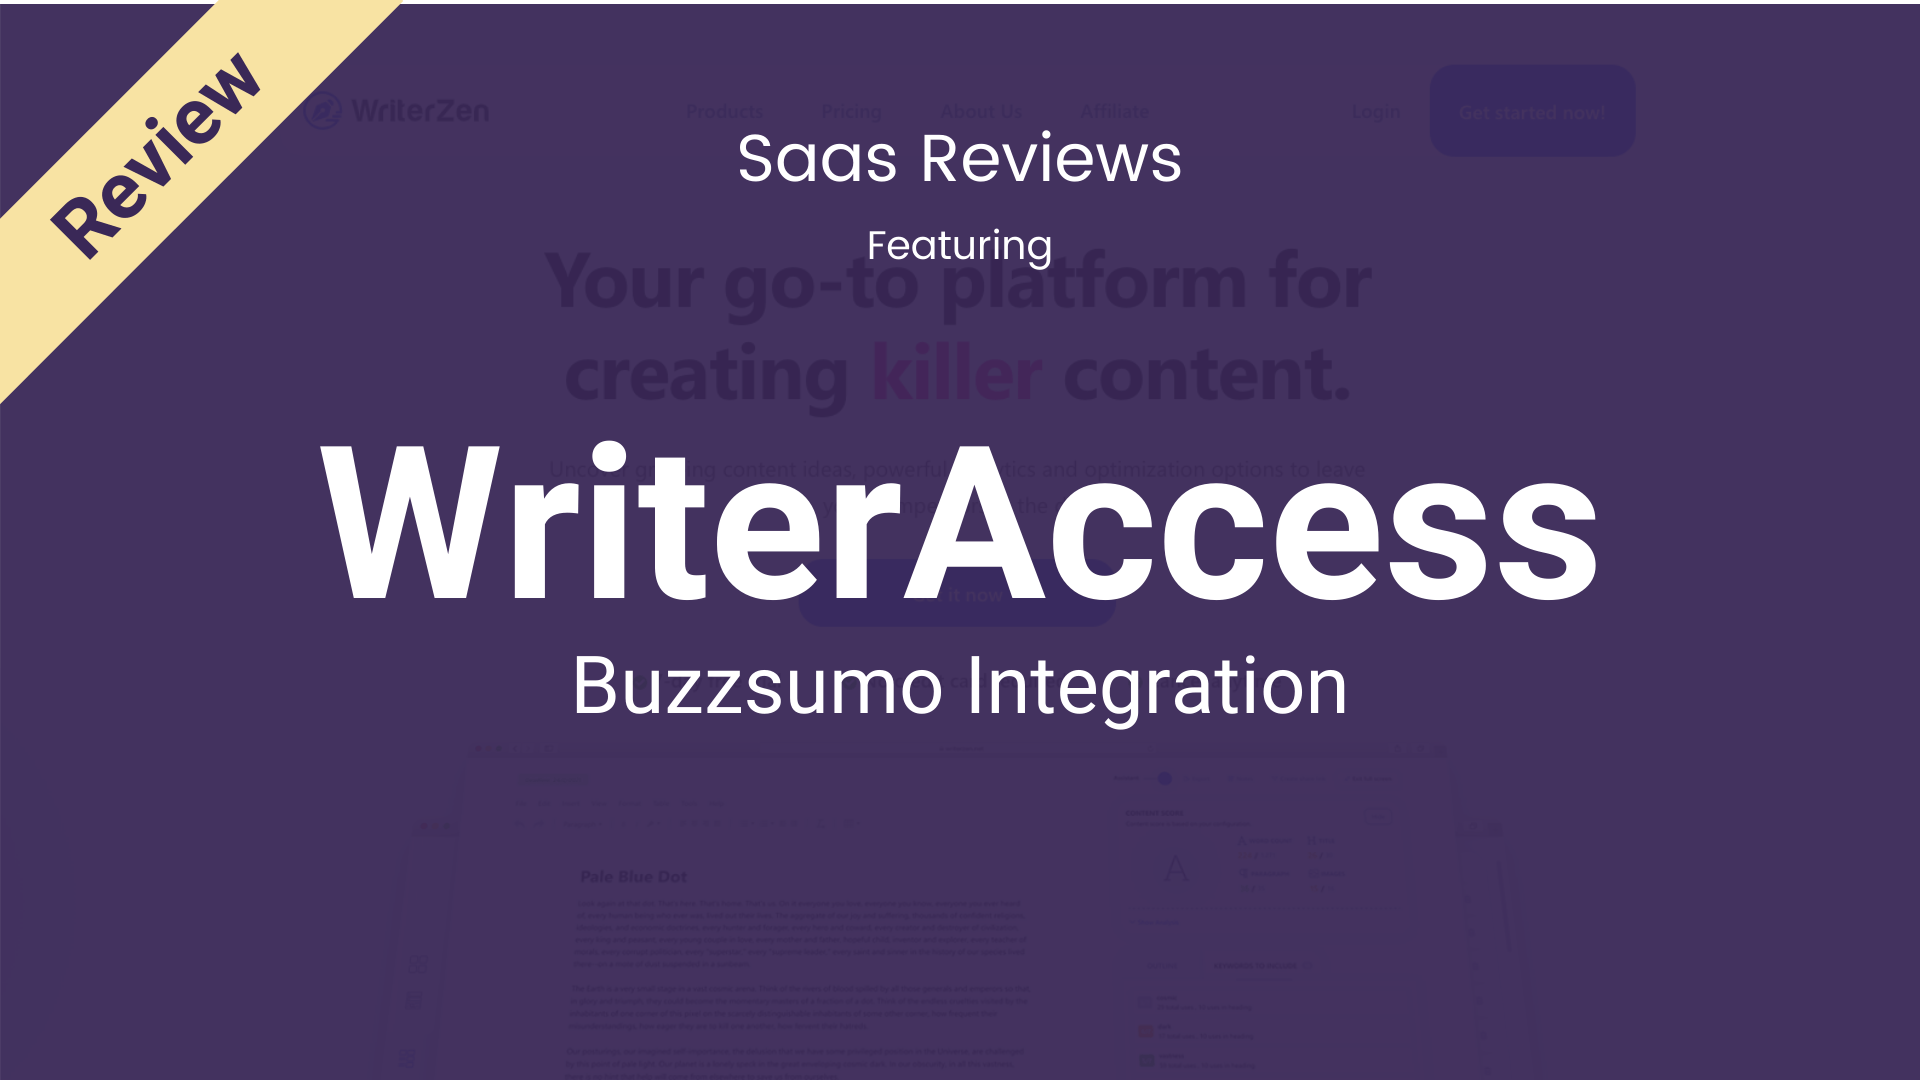 Write Better Content With The BuzzSumo Integration on WriterAccess!